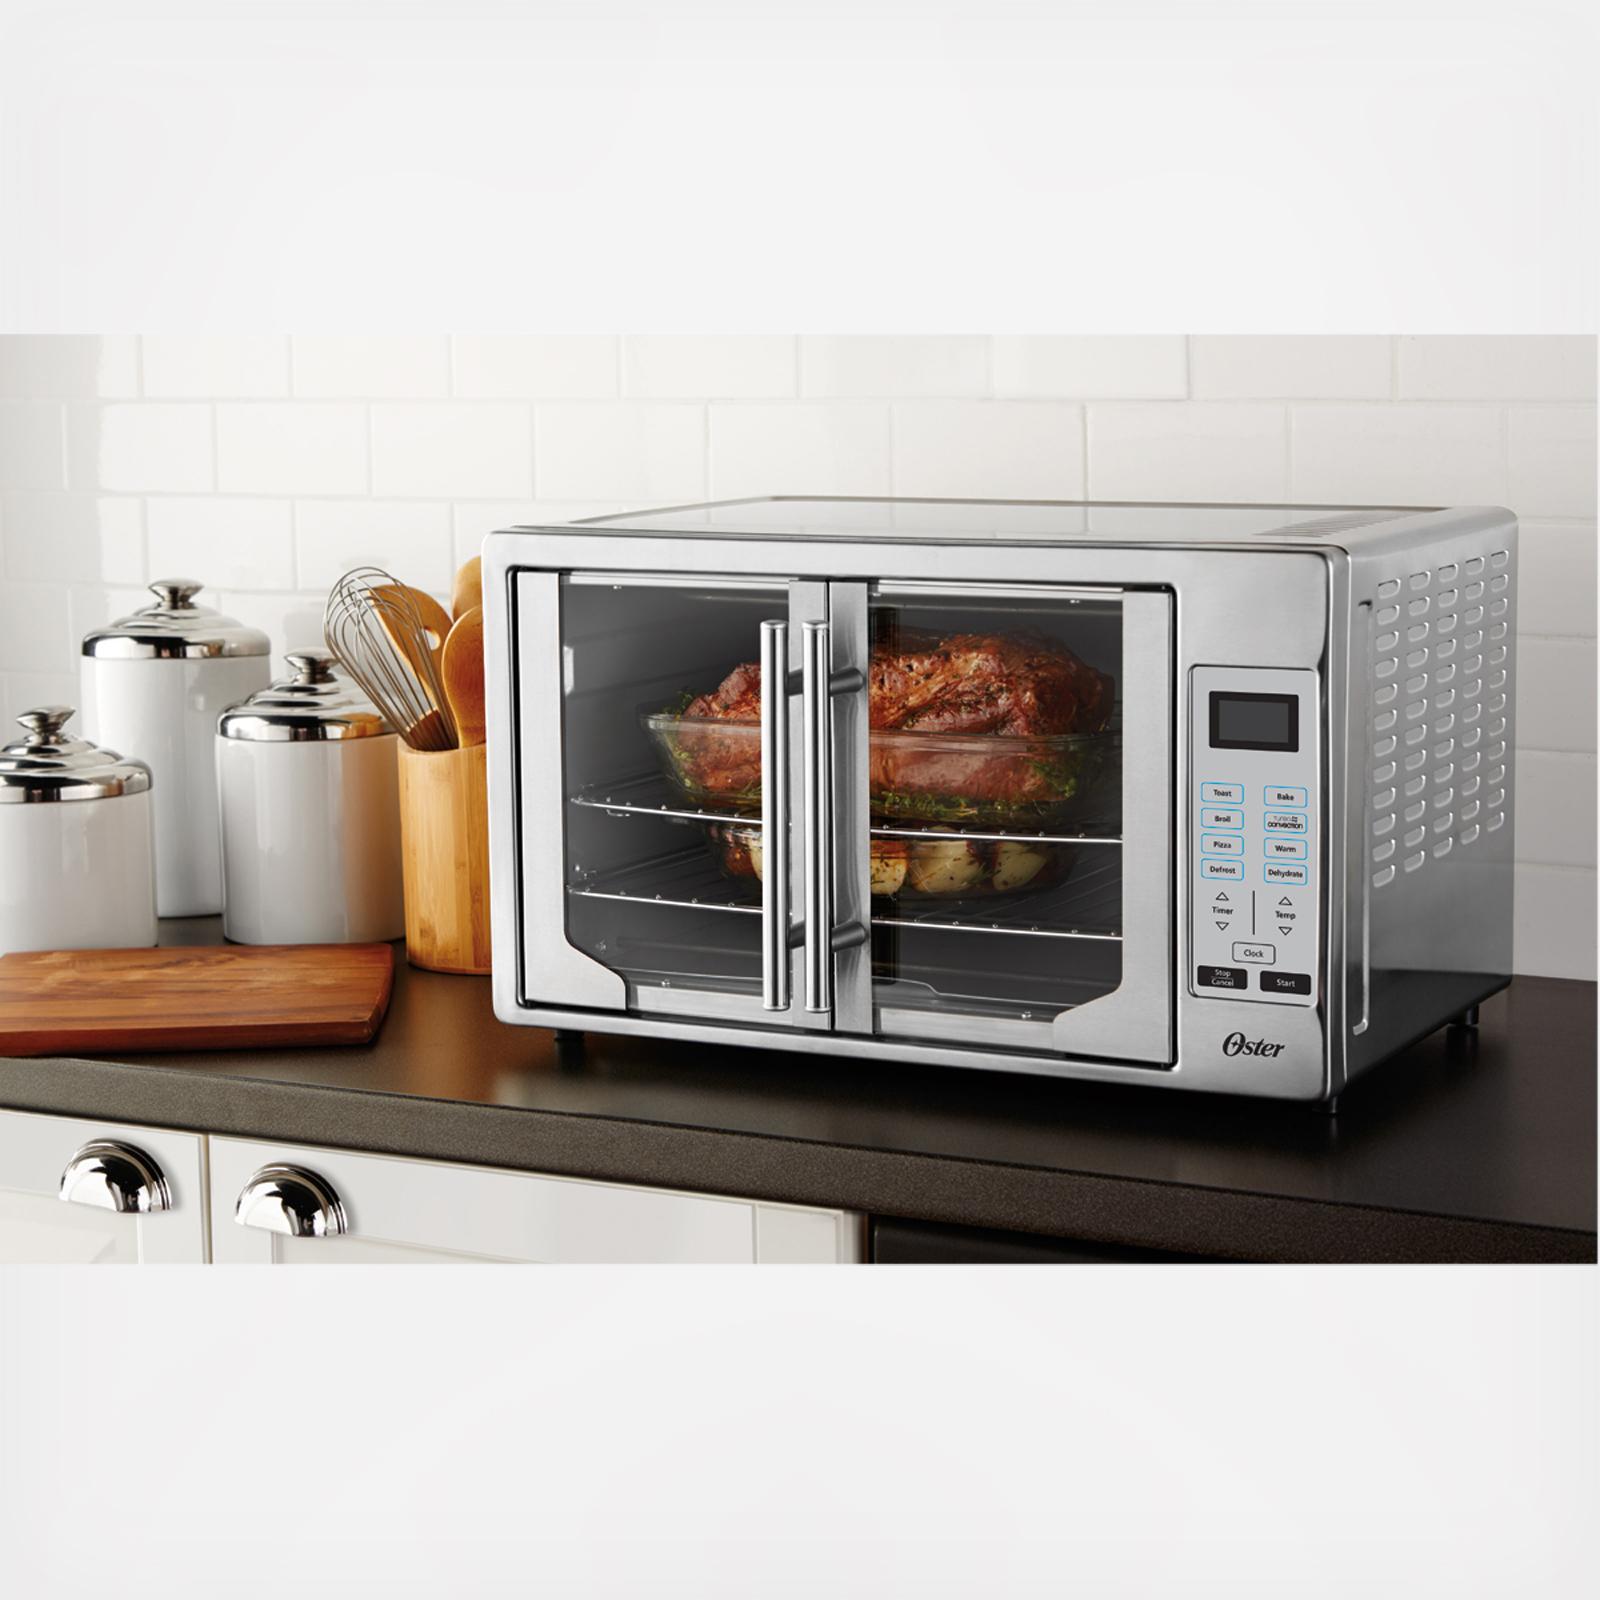 Oster French Door Toaster Oven, Extra Large, Red